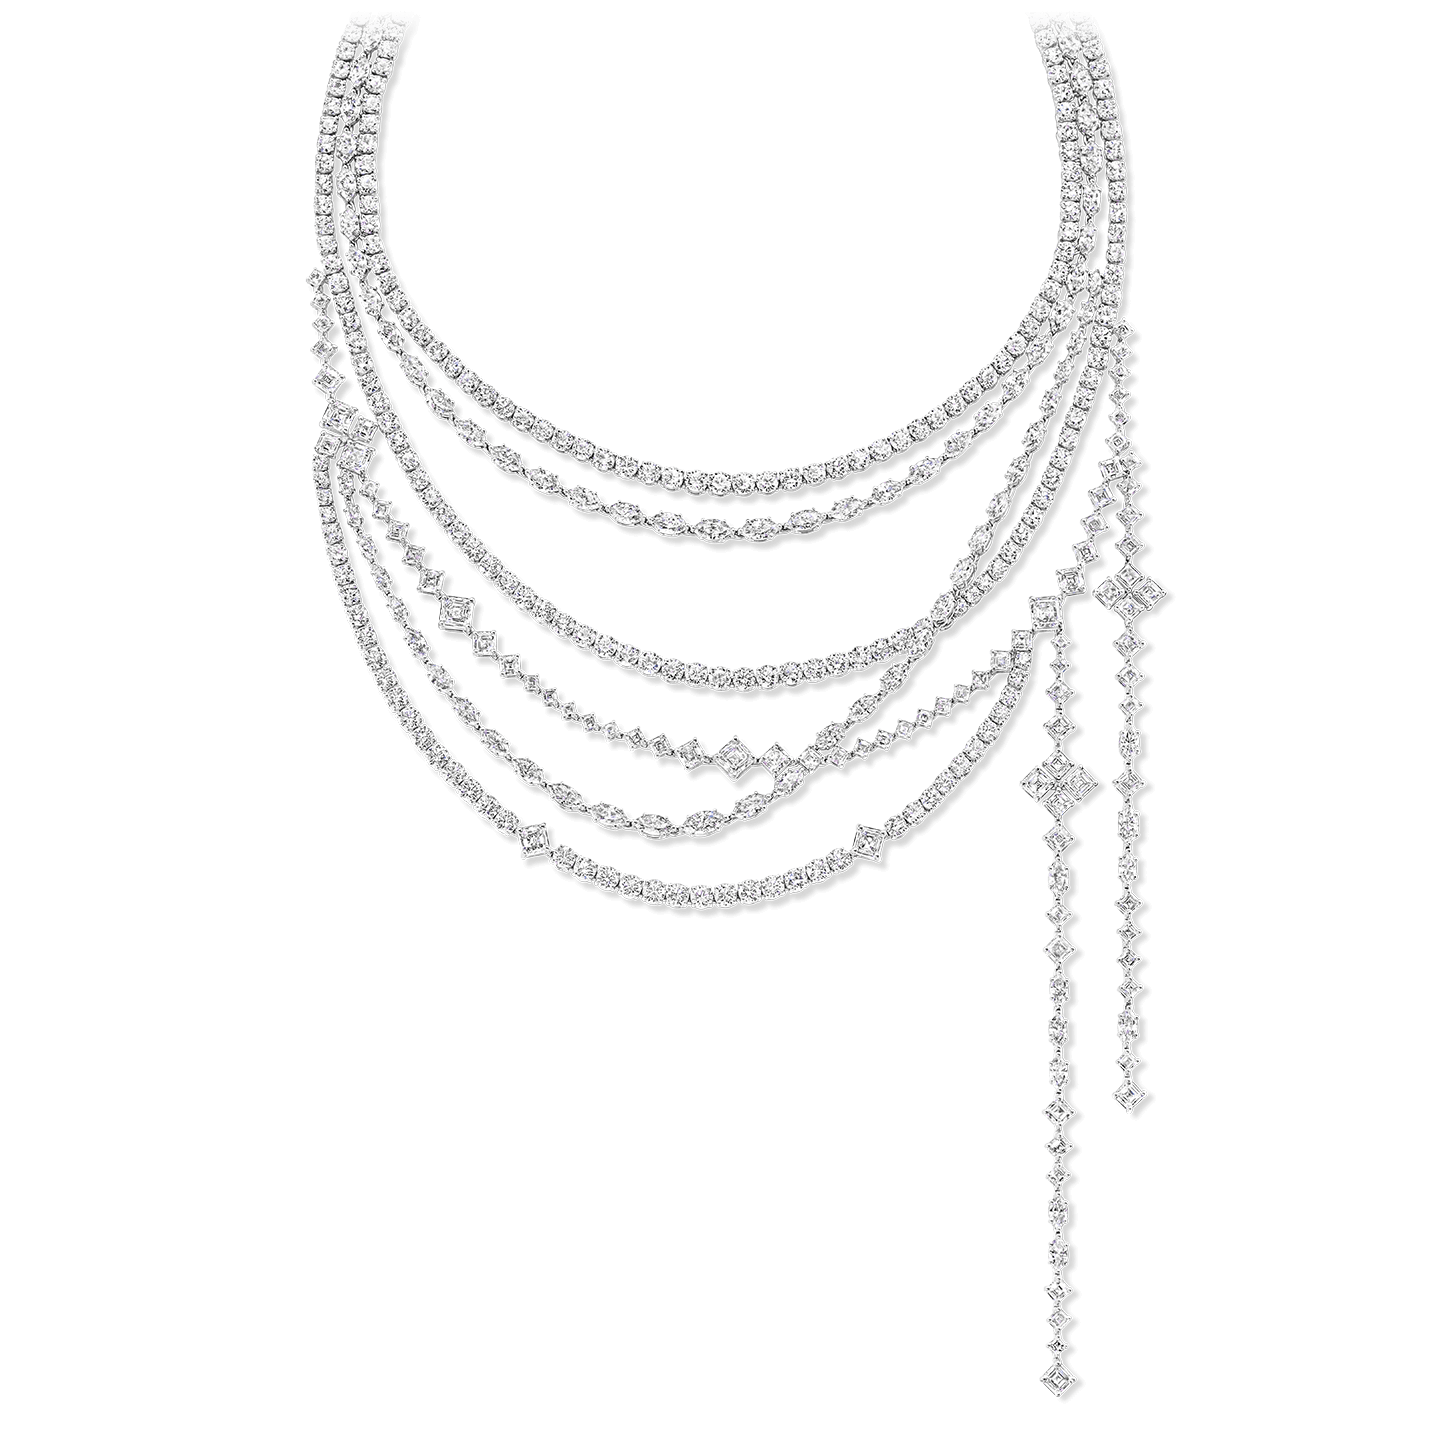  A necklace with 568 marquise, round brilliant, and square emerald-cut diamonds weighing a total of approximately 115.90 carats, set in platinum. Elements of the necklace may be worn in seven different configurations. 
